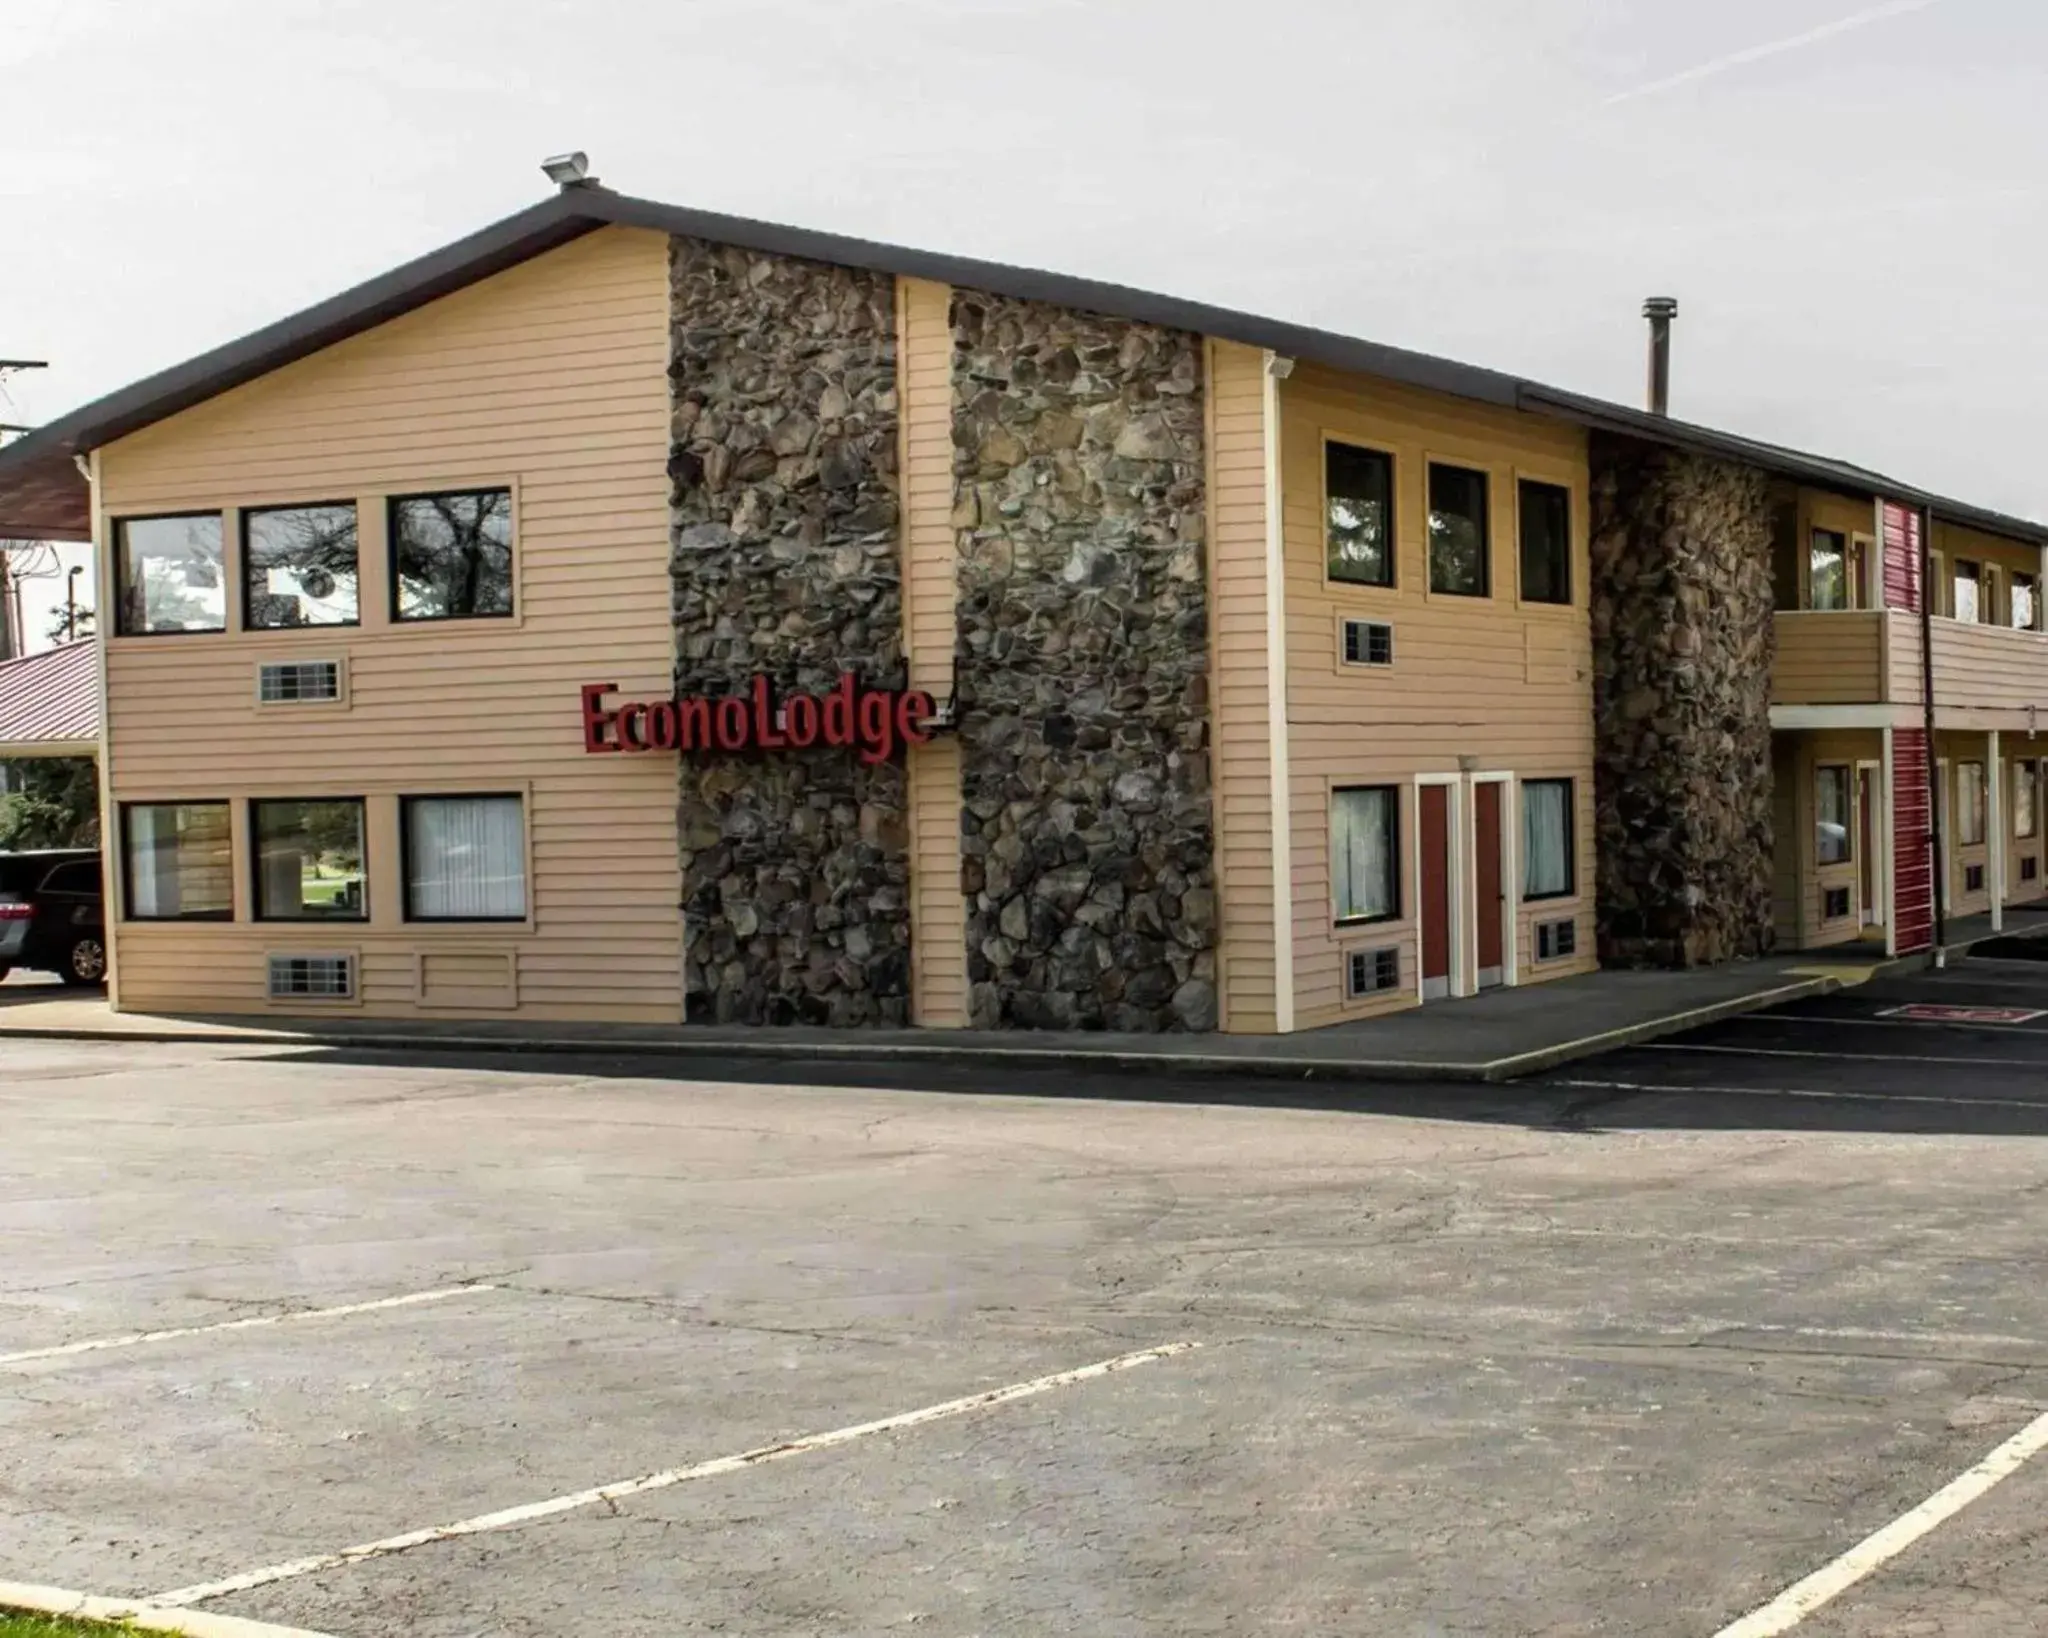 Property Building in Econo Lodge Wooster